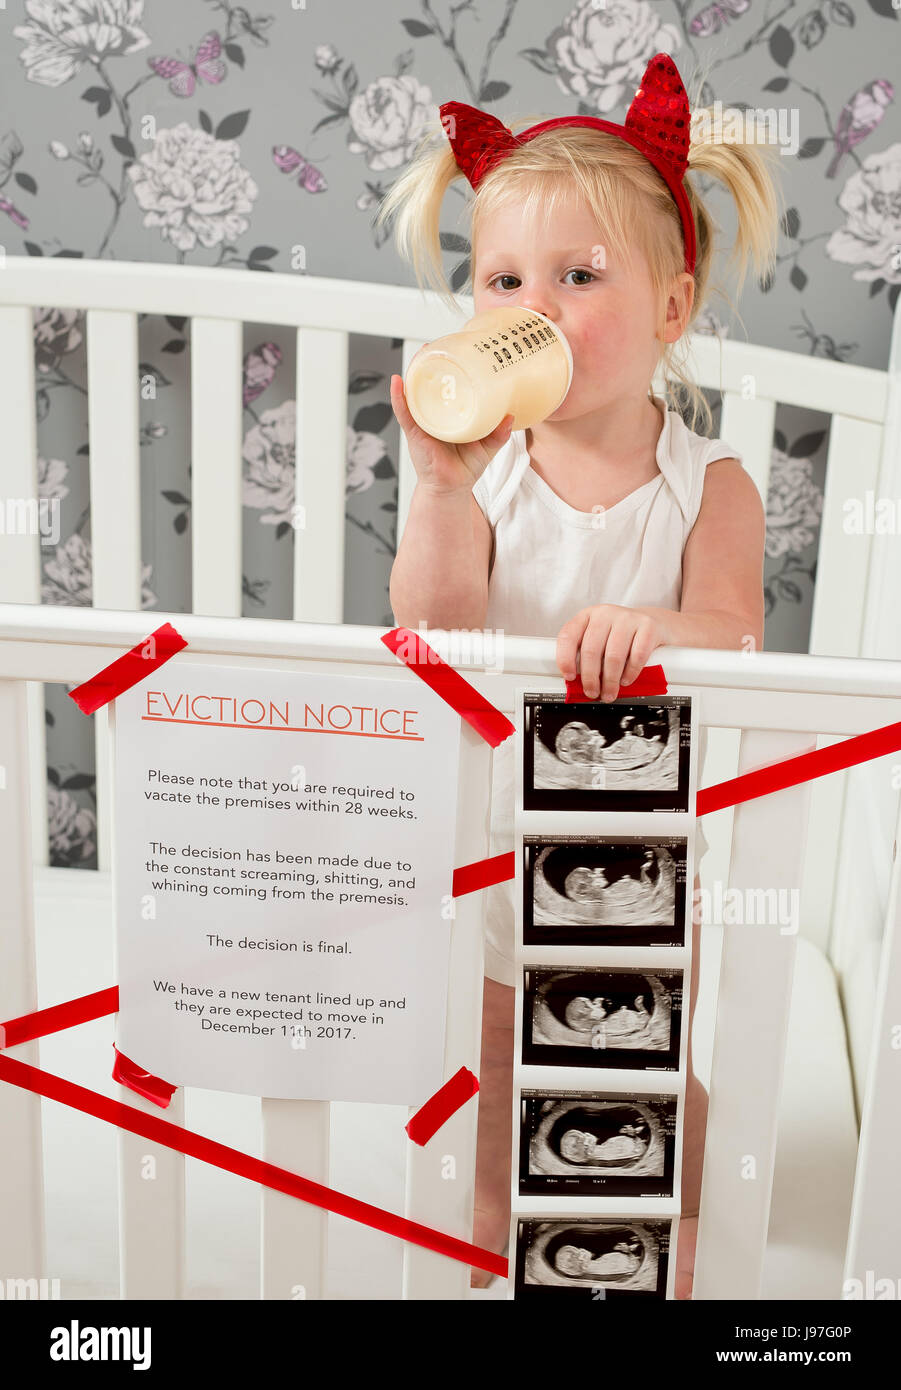 Funny baby announcement. A child stood up in the cot with a funny eviction notice on side. Stock Photo